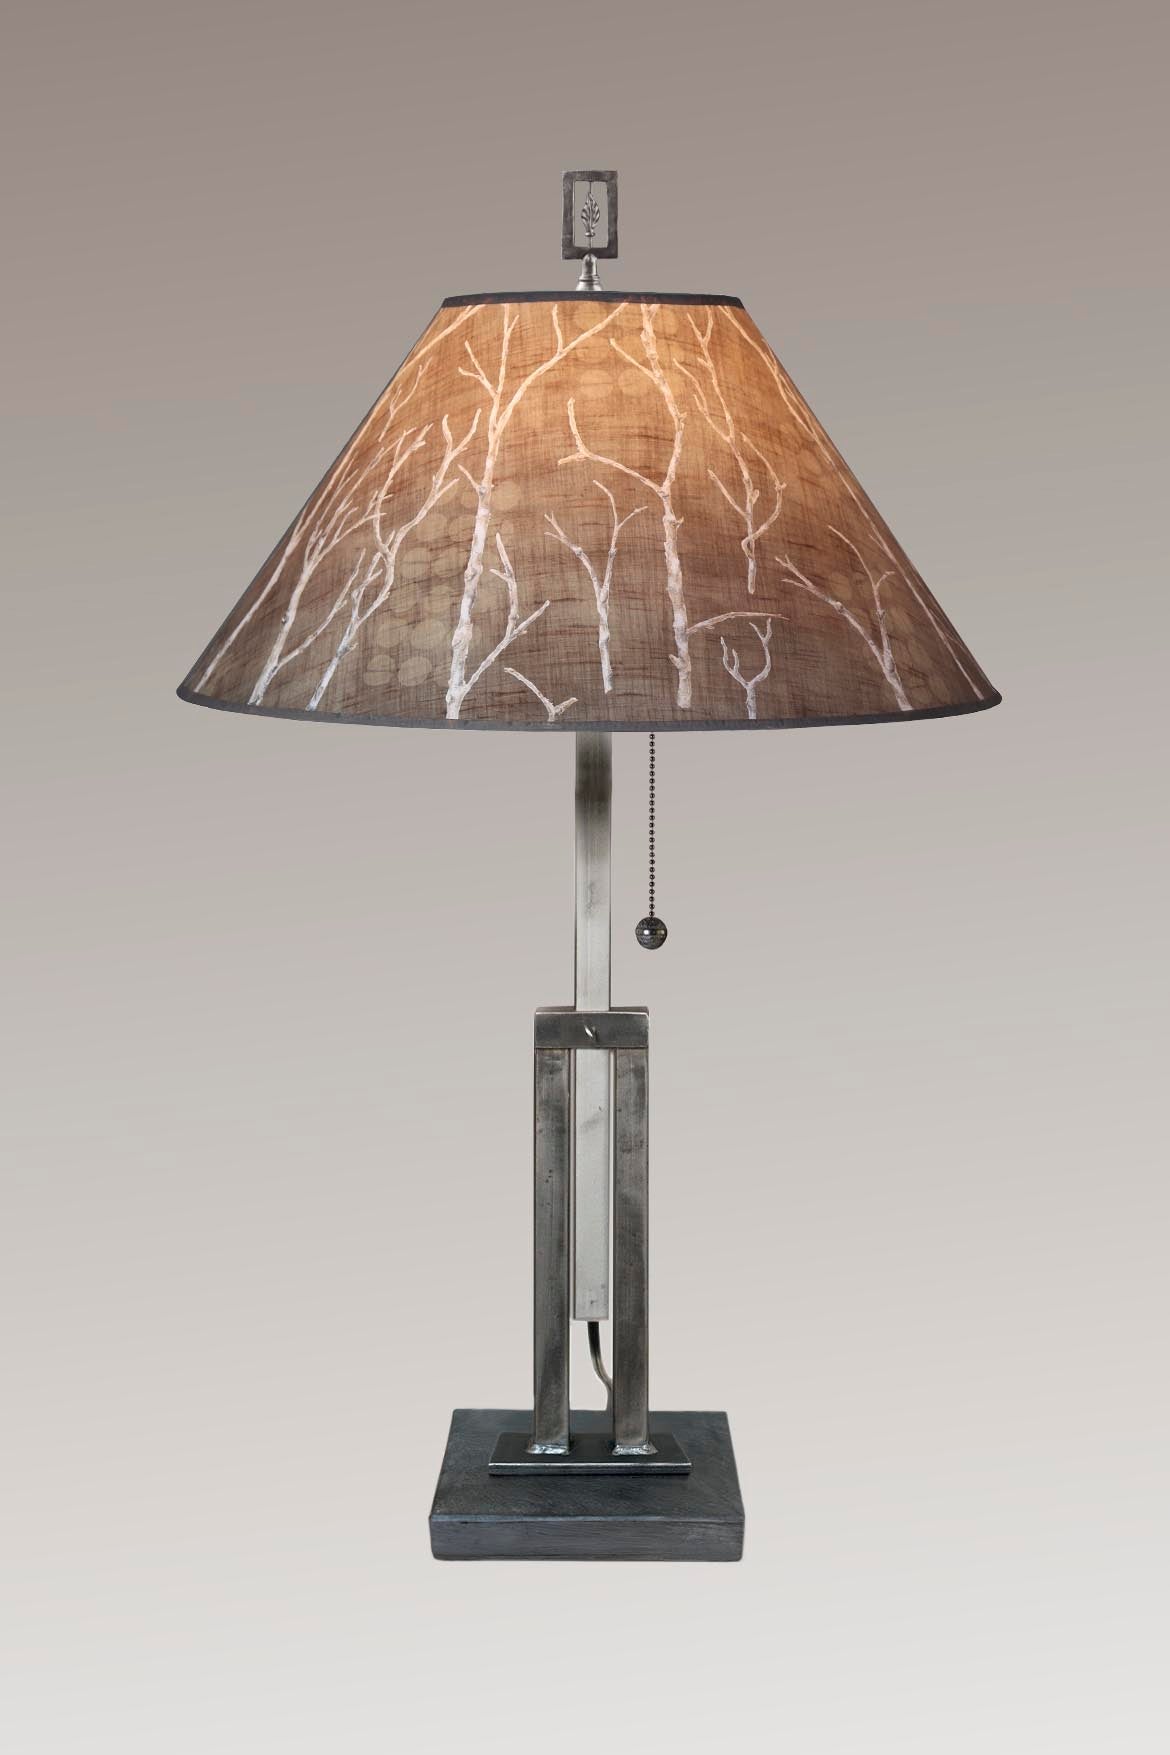 Janna Ugone & Co Table Lamp Adjustable-Height Steel Table Lamp with Large Conical Shade in Twigs